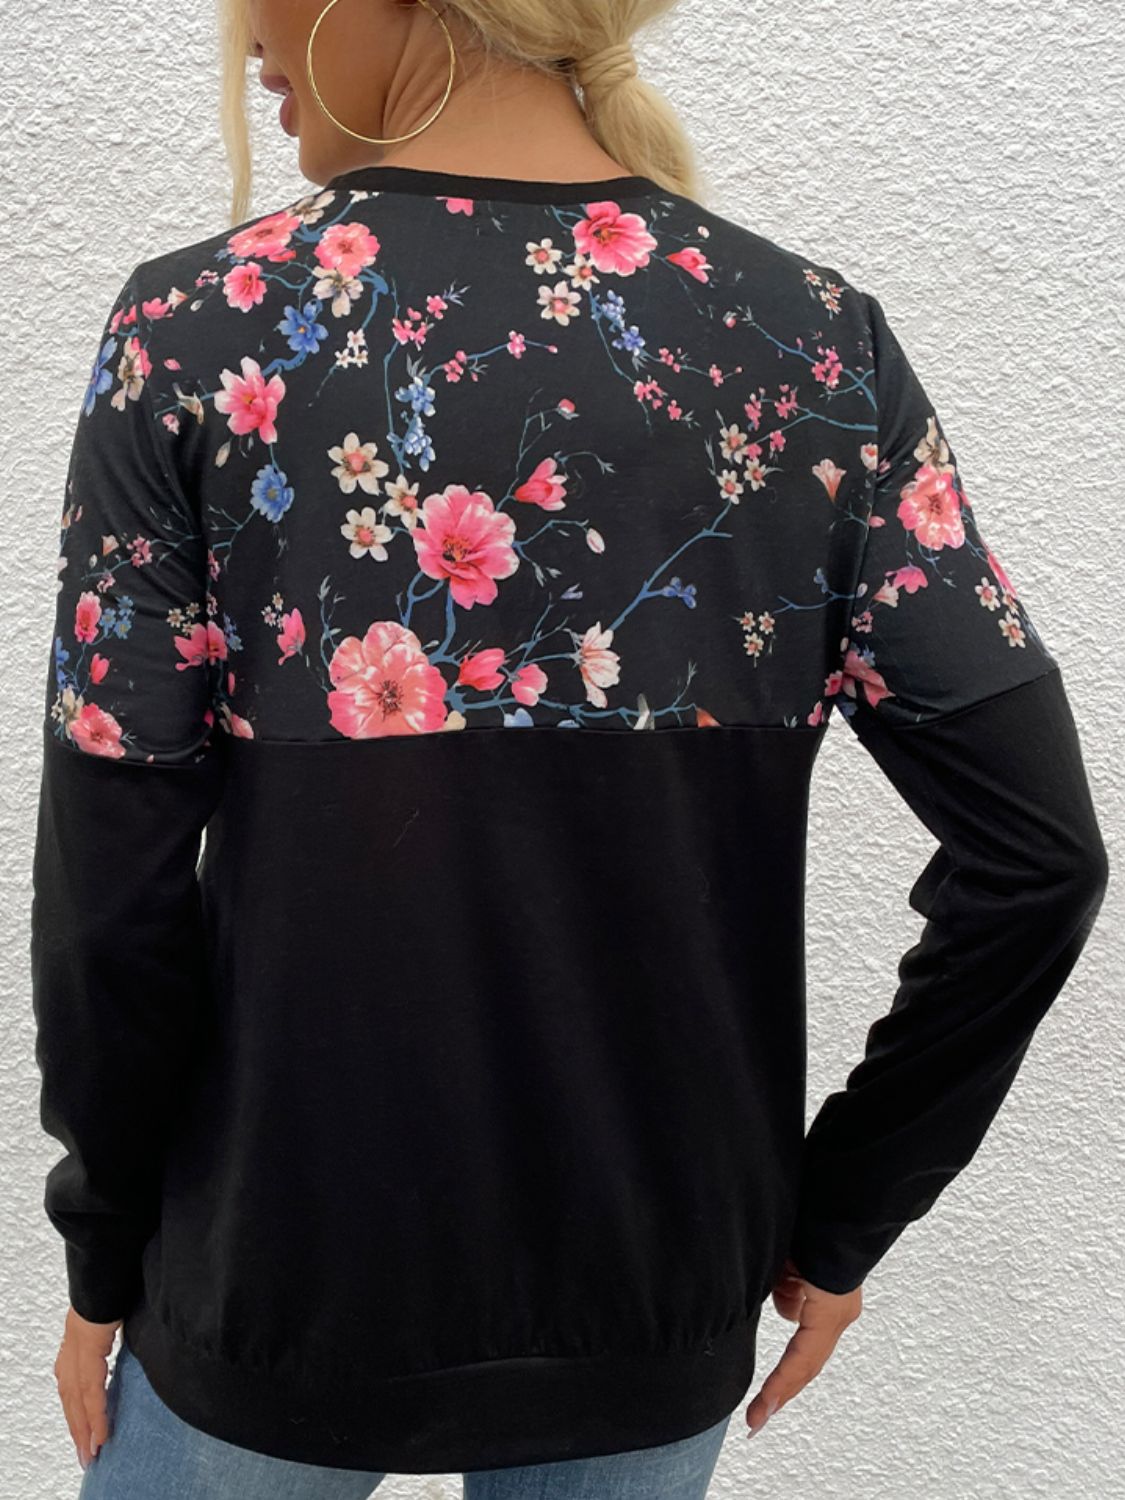 Women’s Floral Print Round Neck Dropped Shoulder Tee